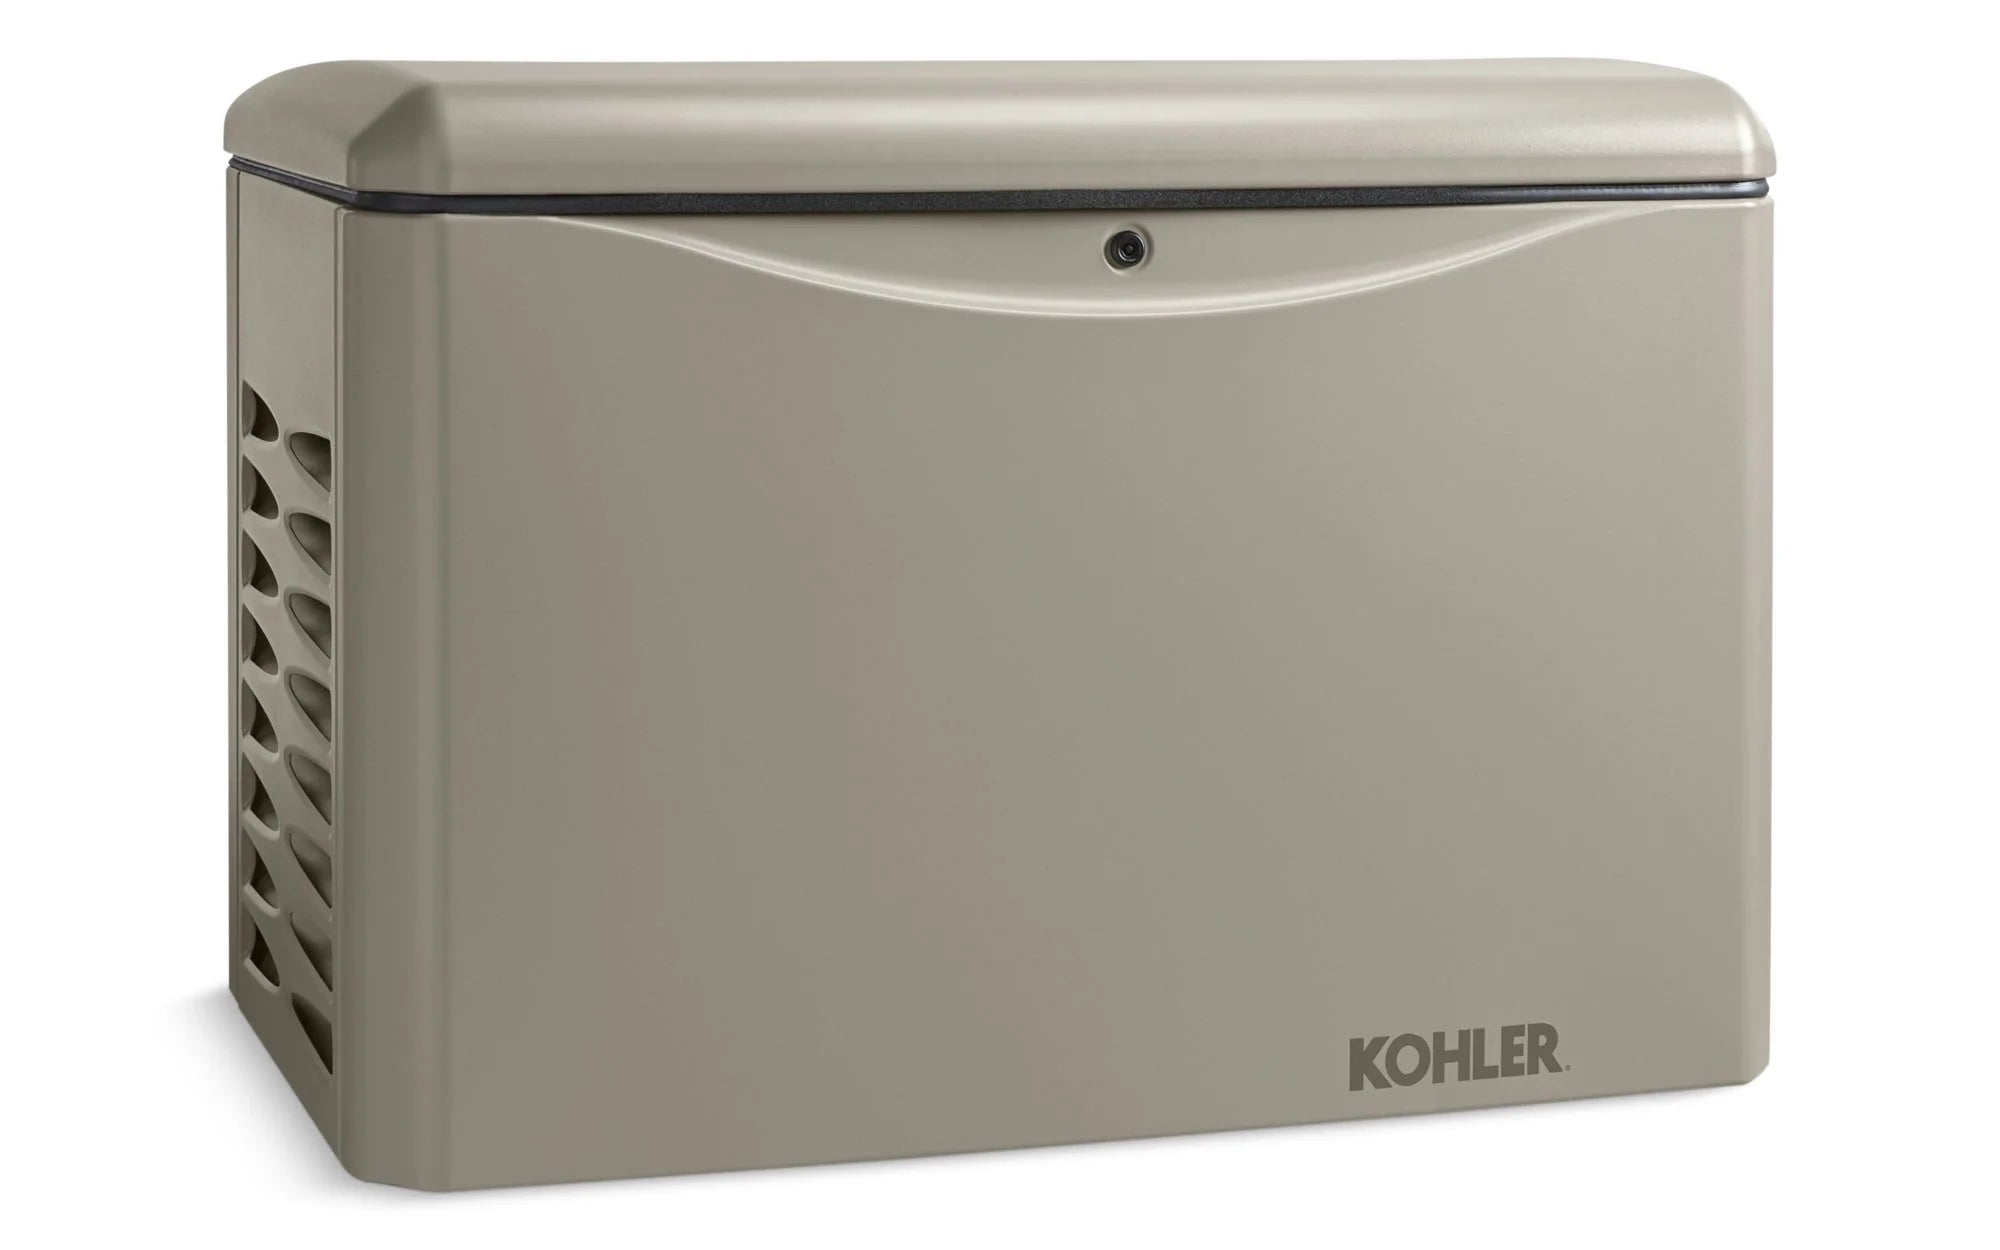 Kohler 20RCA-QS7 20KW 120/208V 3-Phase Standby Generator with OnCue Plus New